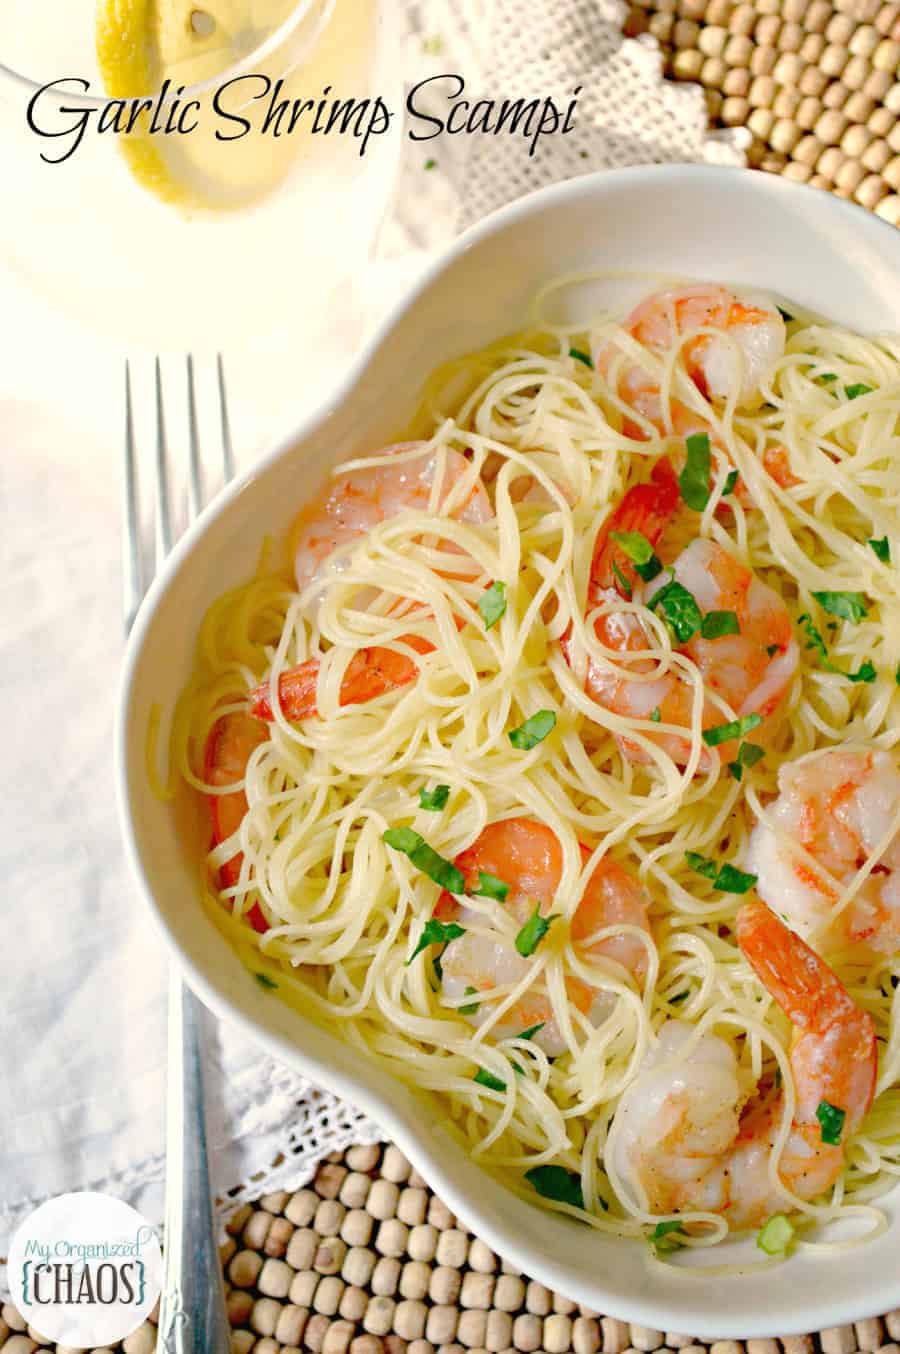 A bowl of food on a plate, with Shrimp and pasta